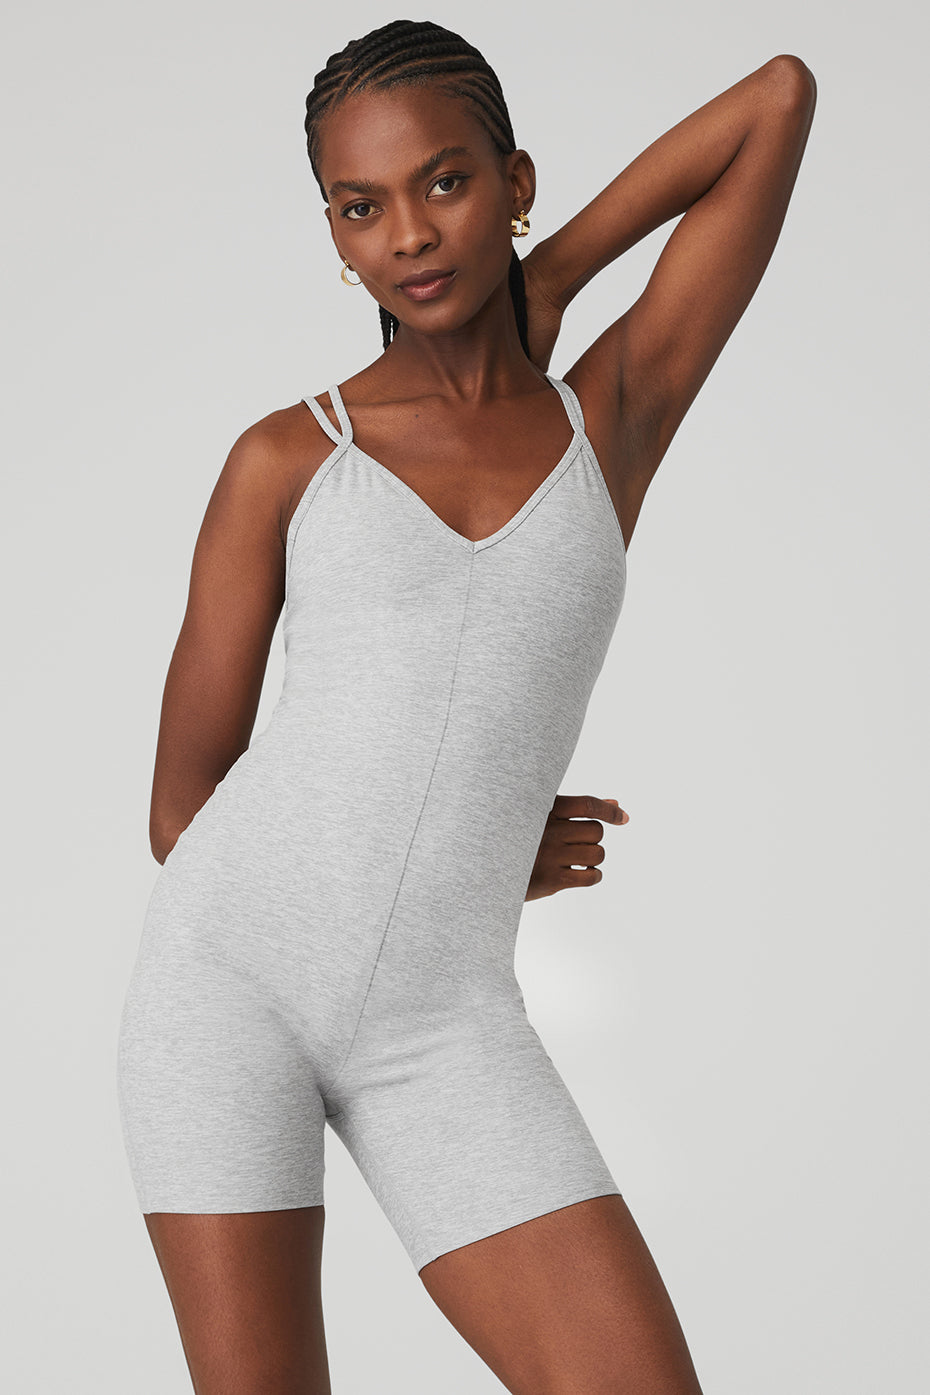 Alosoft Suns Out Onesie - Athletic Heather Grey